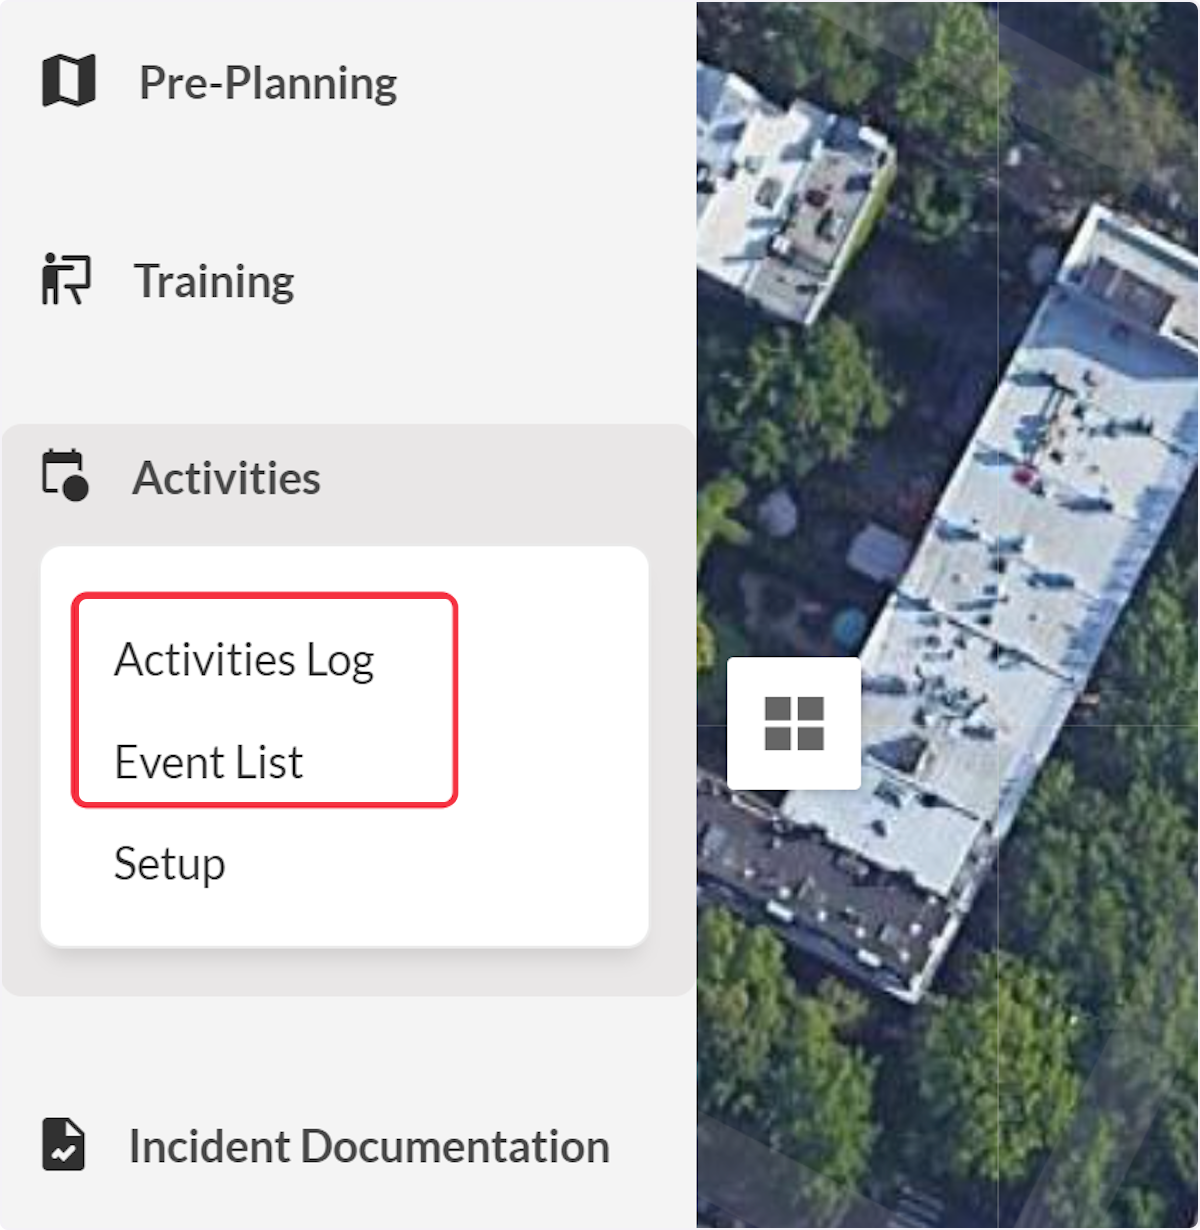 Click on Activities Log or Events List